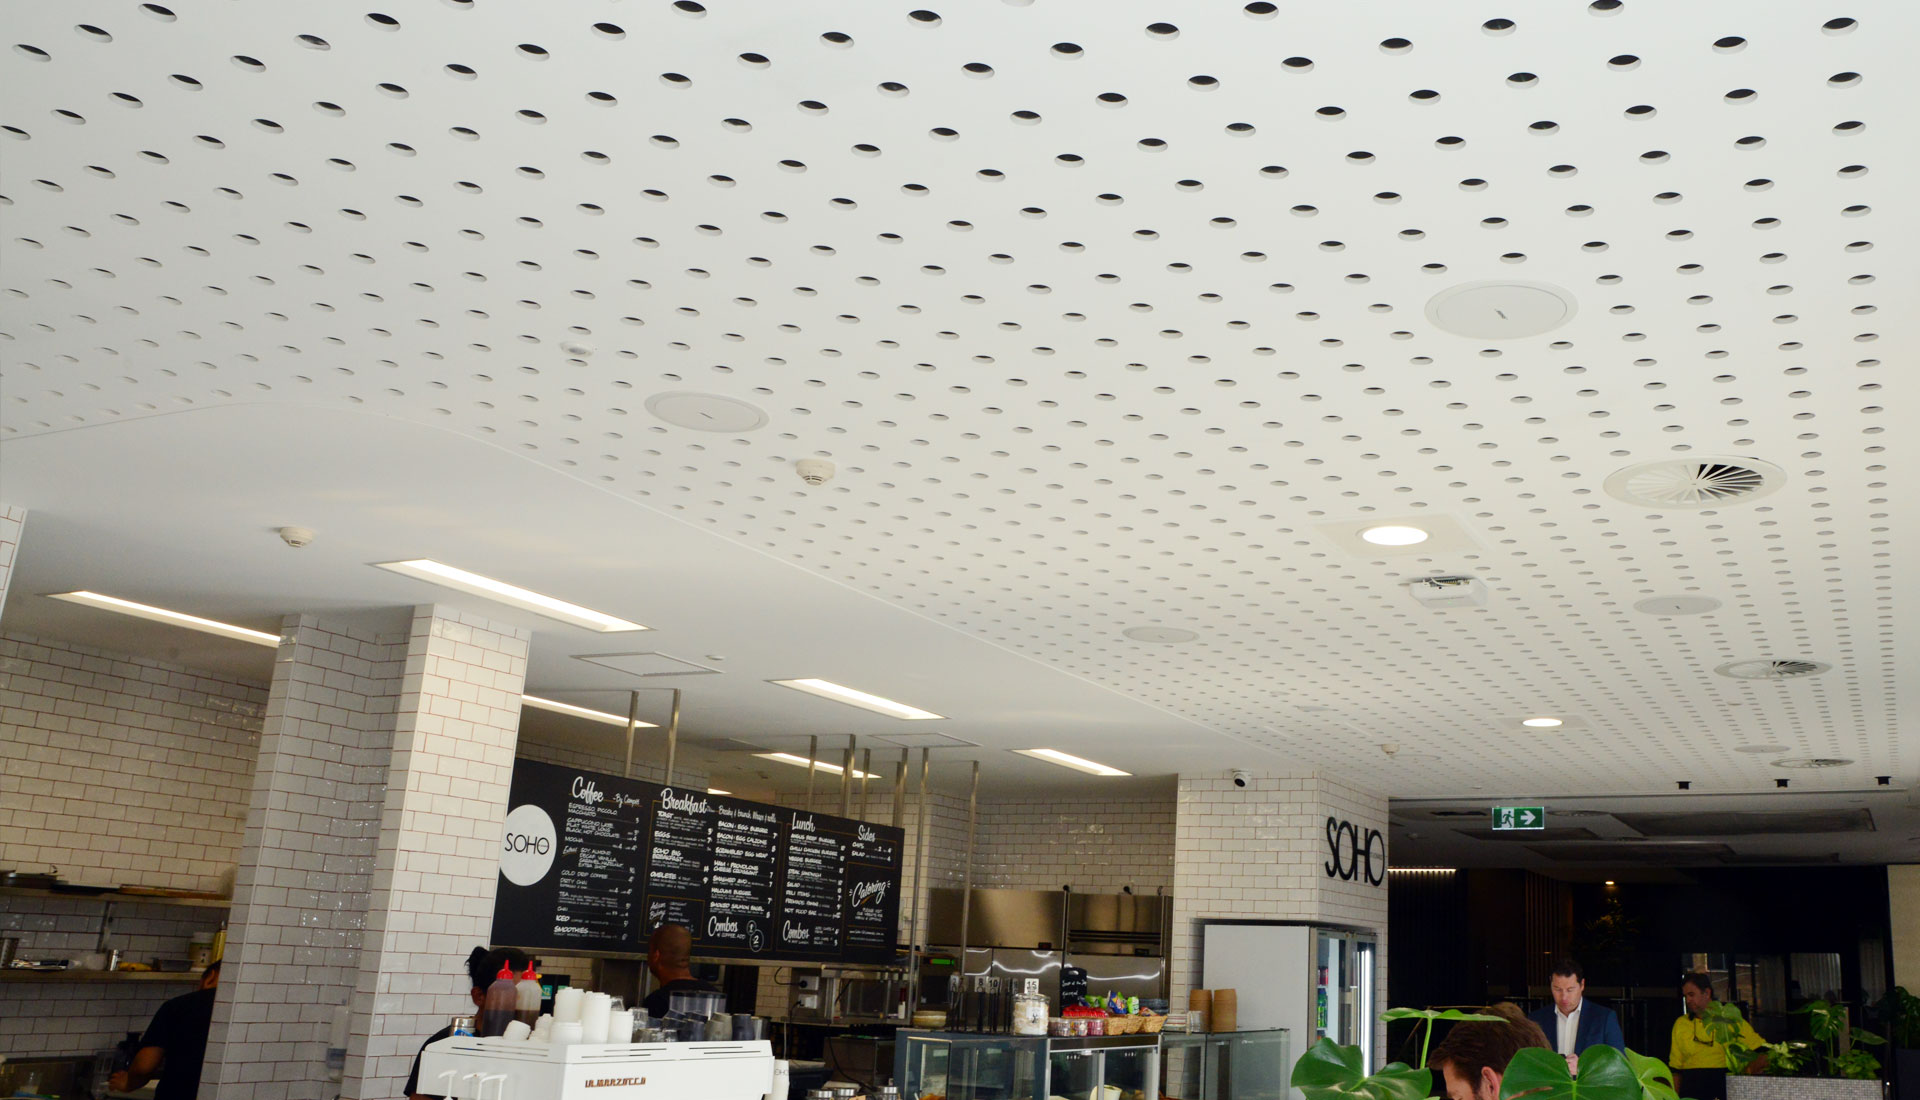 Acoustic perforated plasterboard ceiling panels